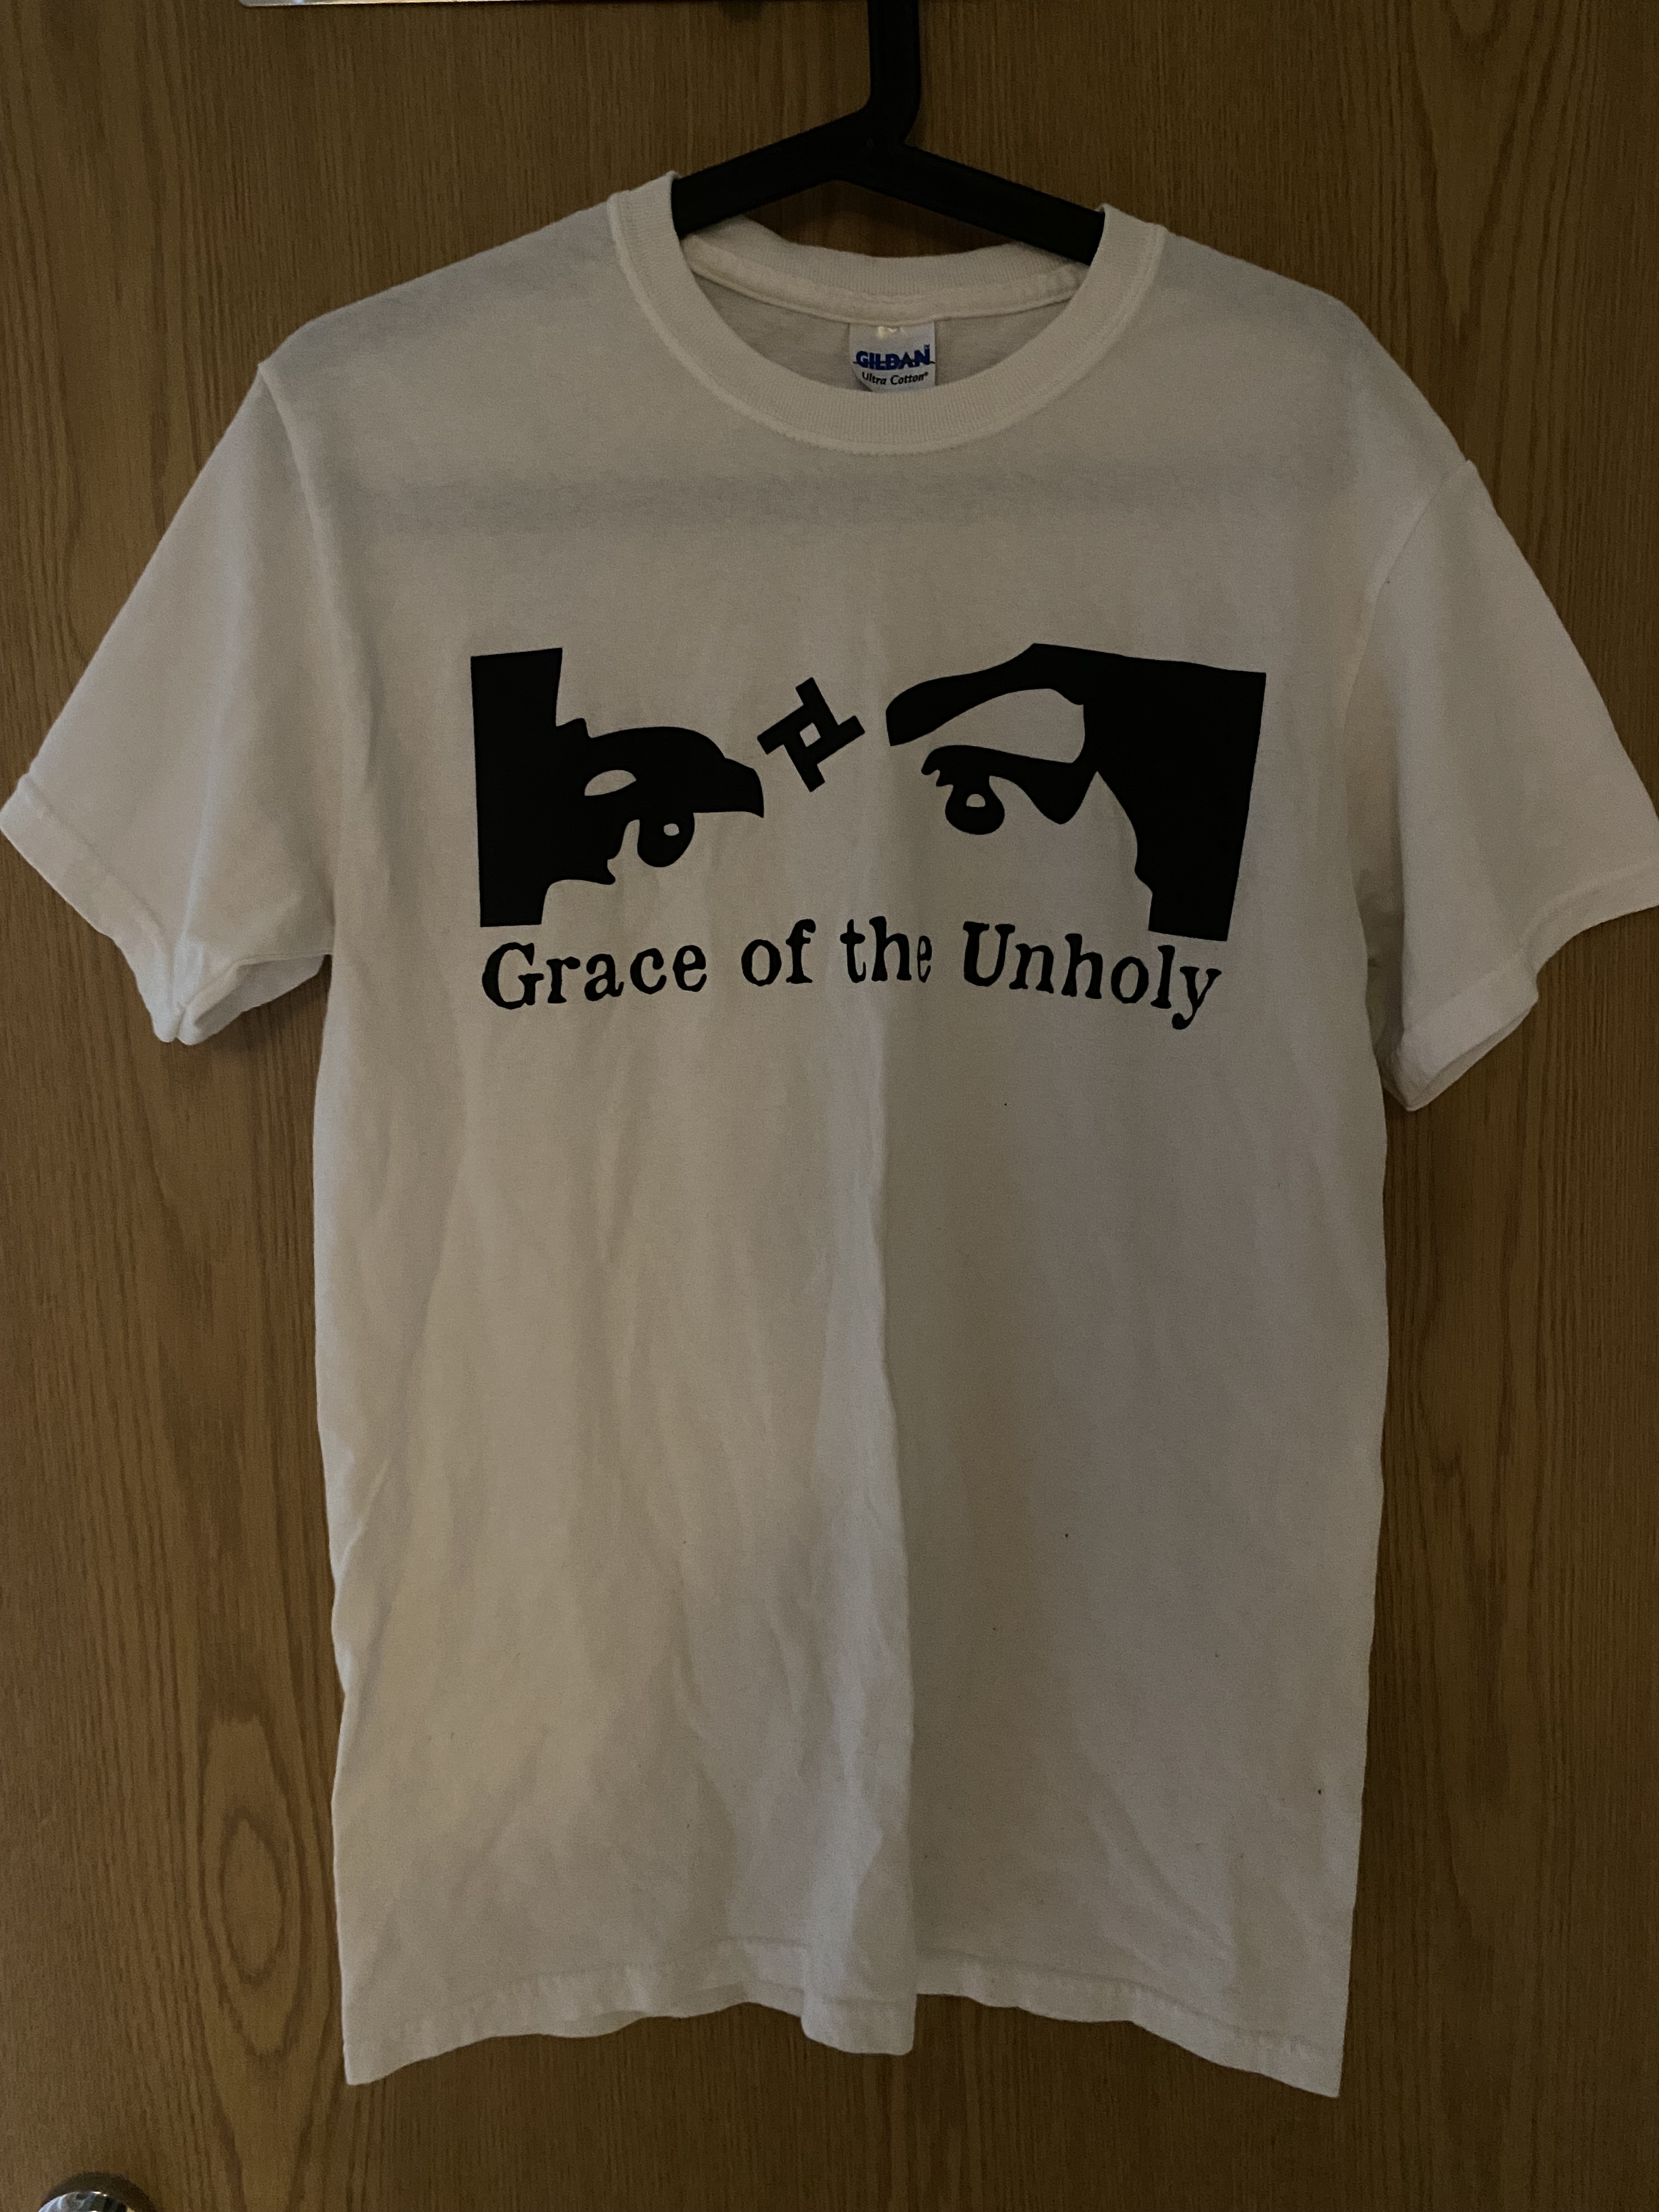 Grace of the Unholy - Size Small